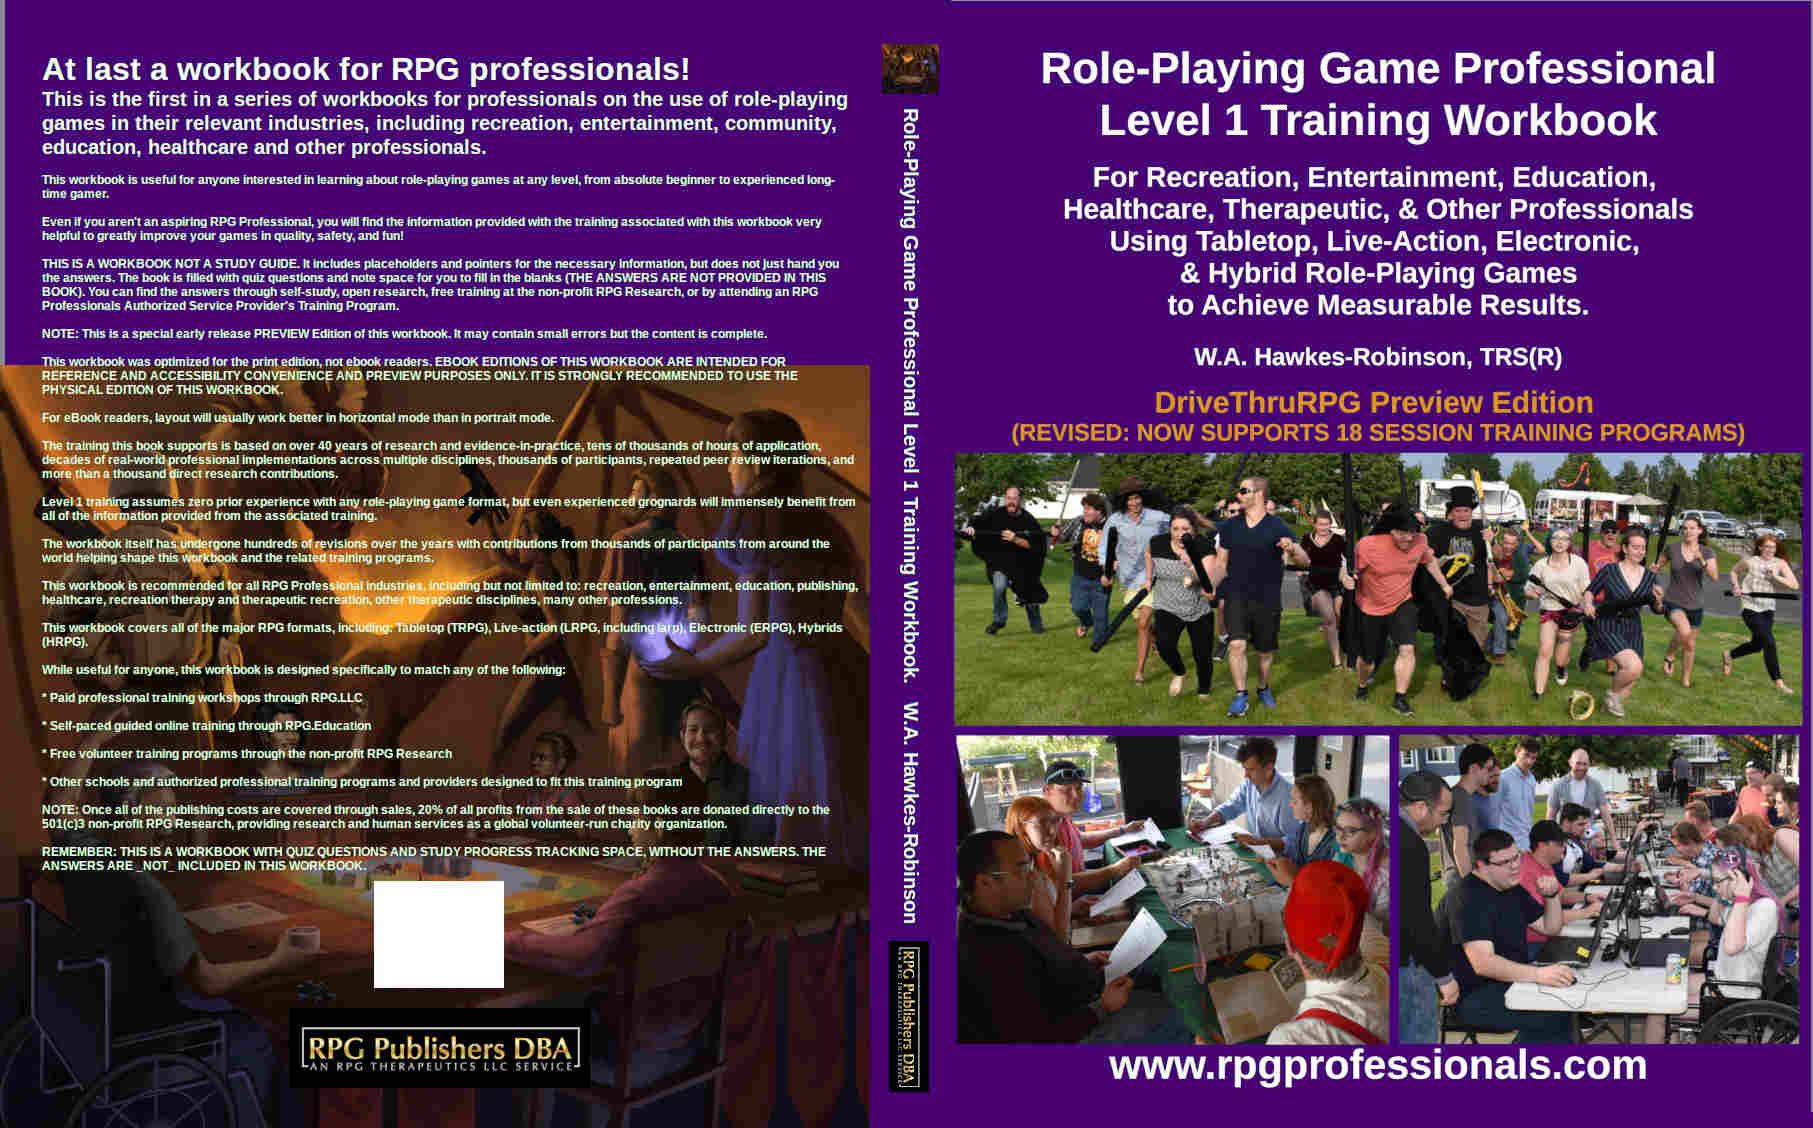 1982+ began providing role-playing game professional game master services.